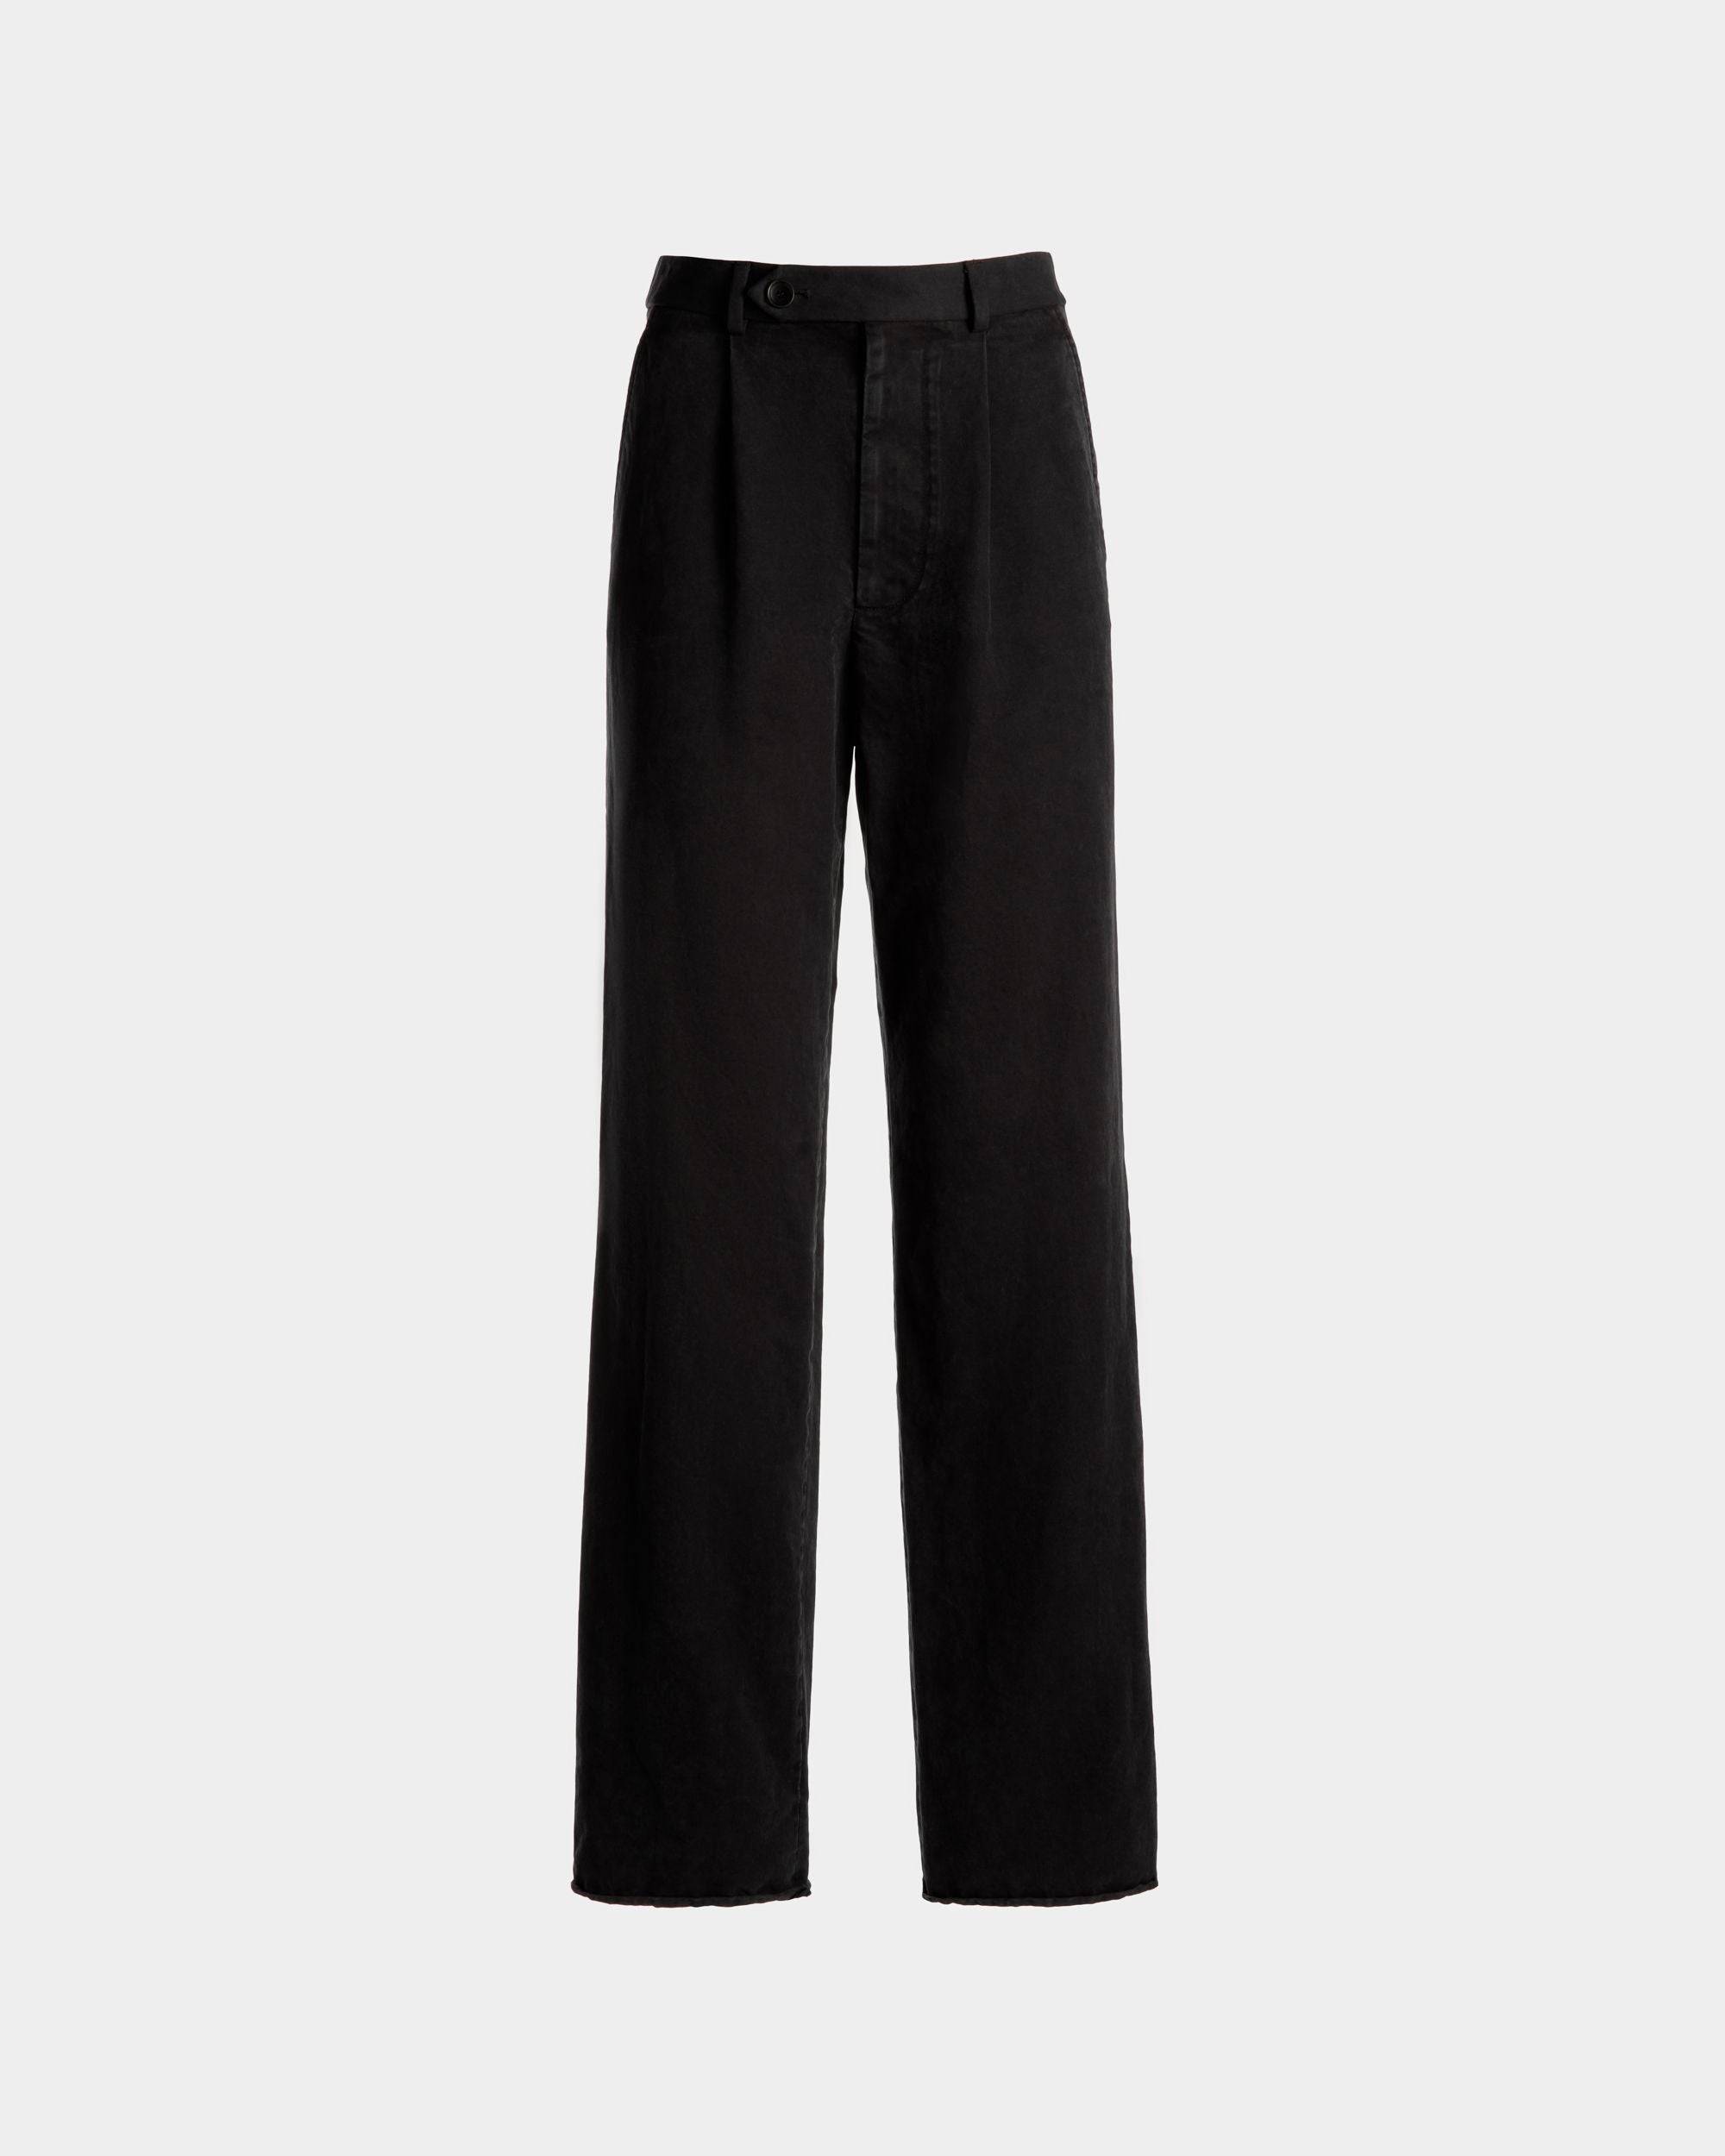 Women's Pleated Pants in Black Washed Cotton | Bally | Still Life Front